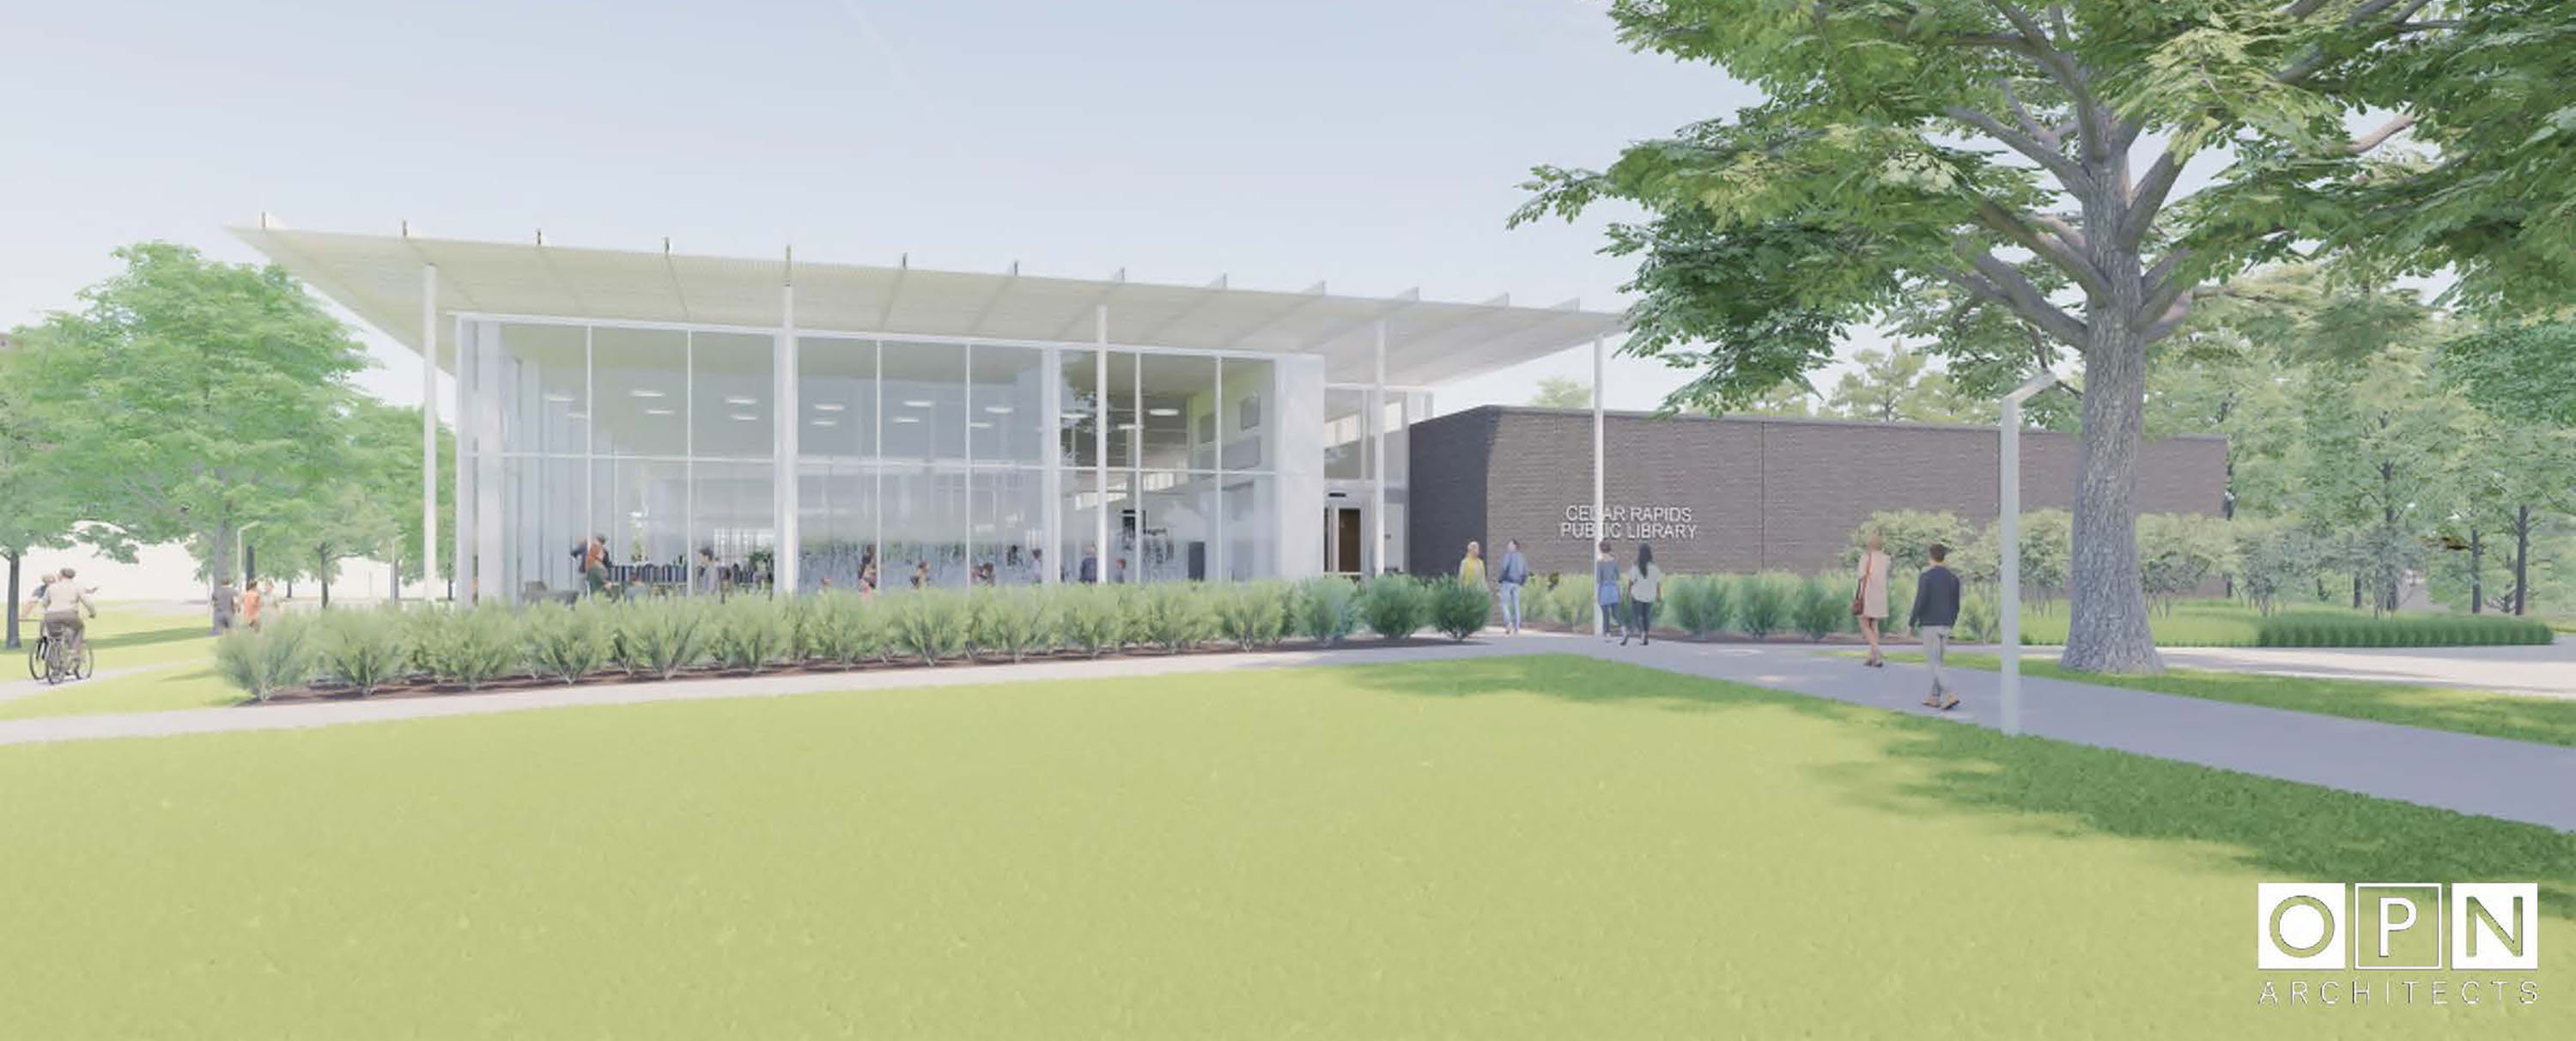 Rendering of new westside library from west entrance